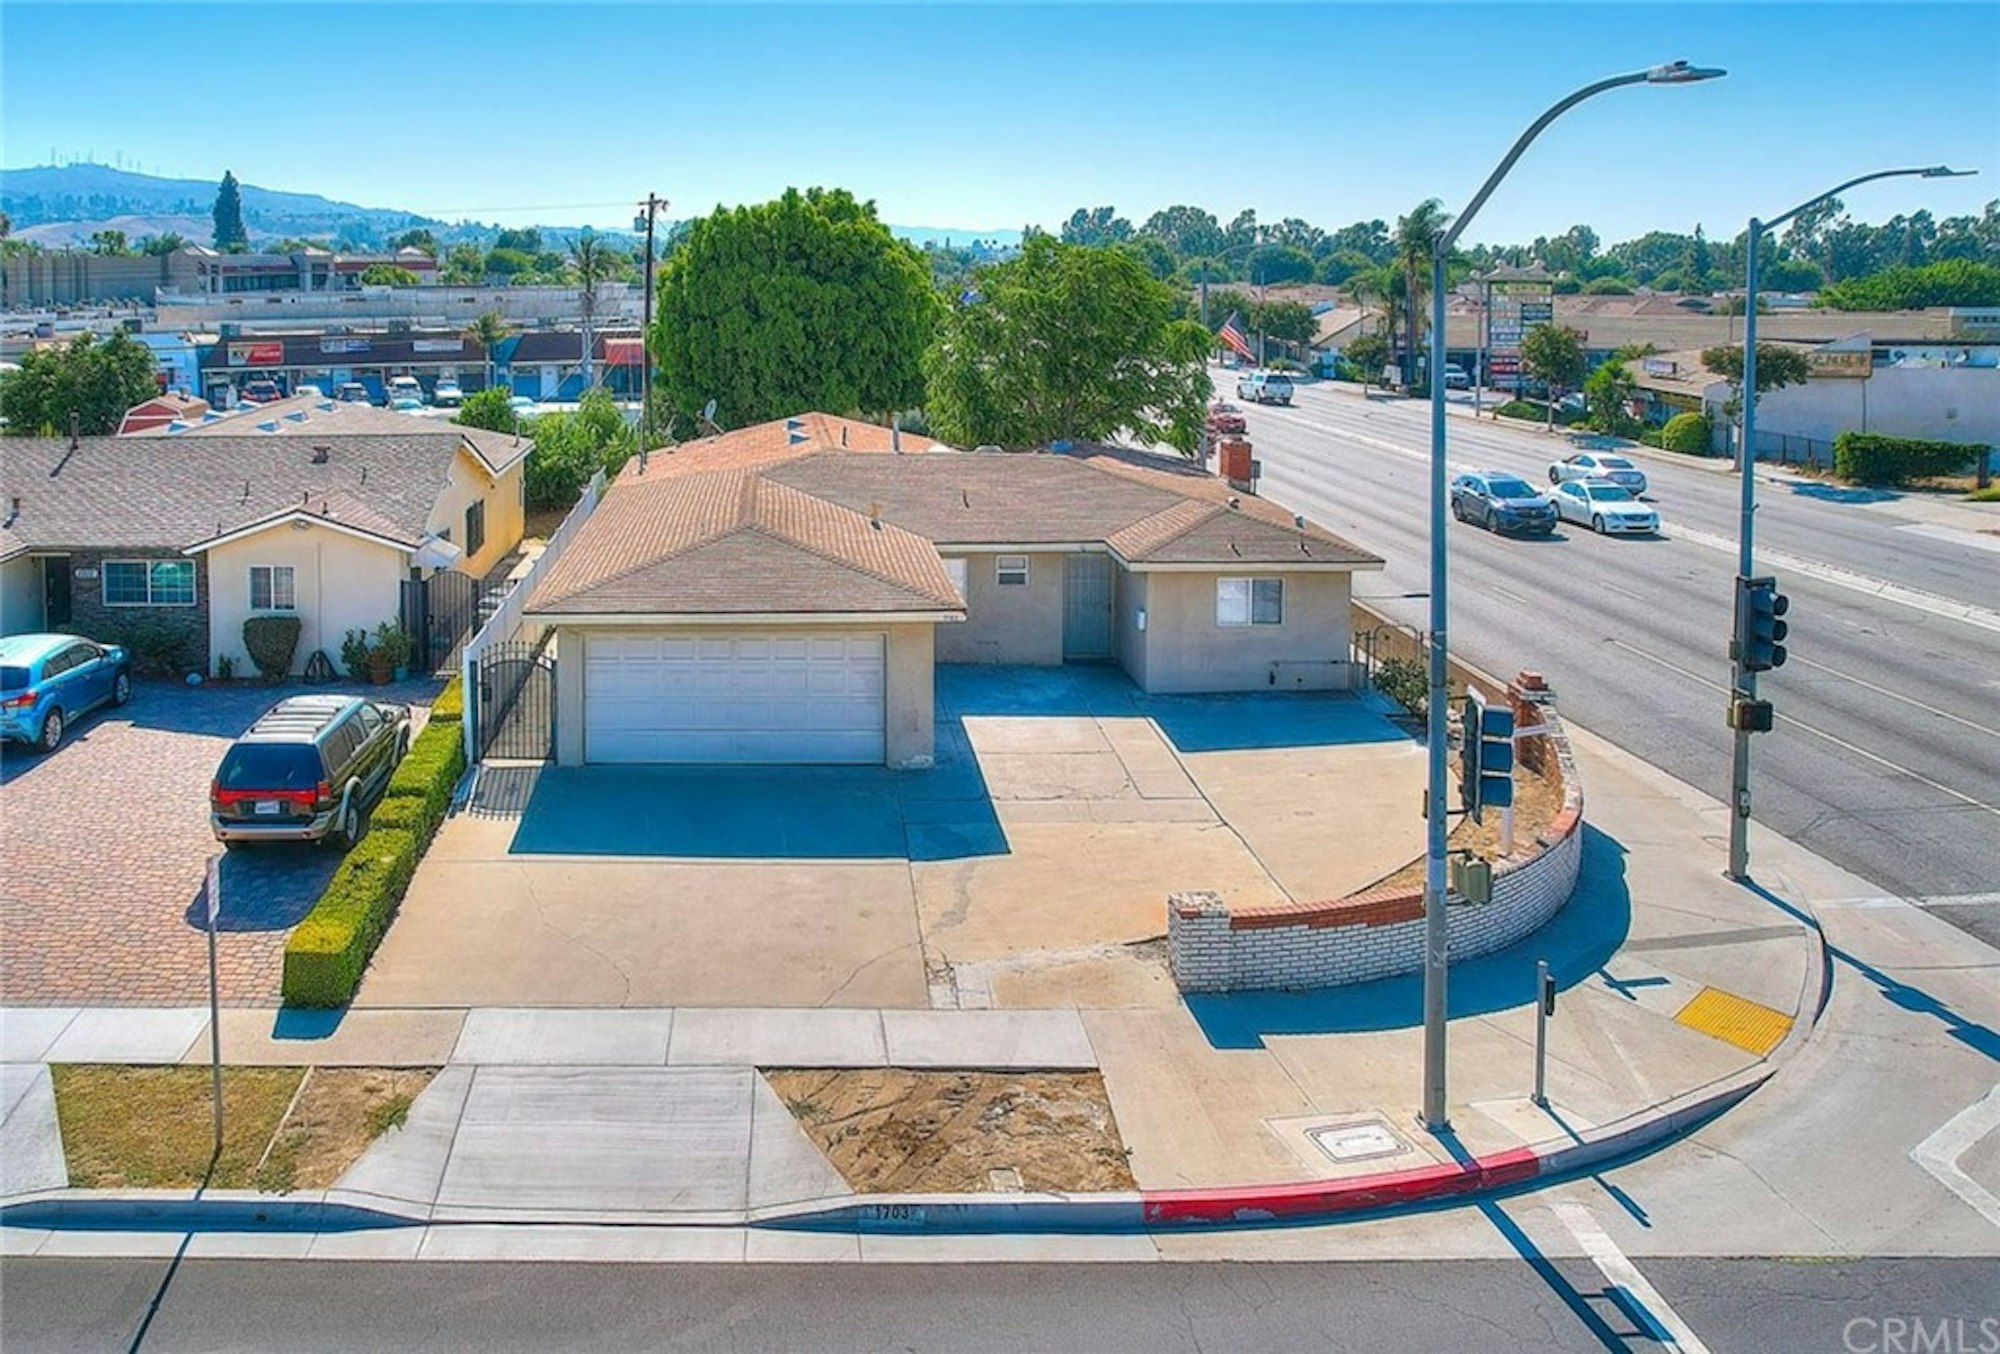 Photo 1 of 60 - 1703 Paso Real Ave, Rowland Heights, CA 91748